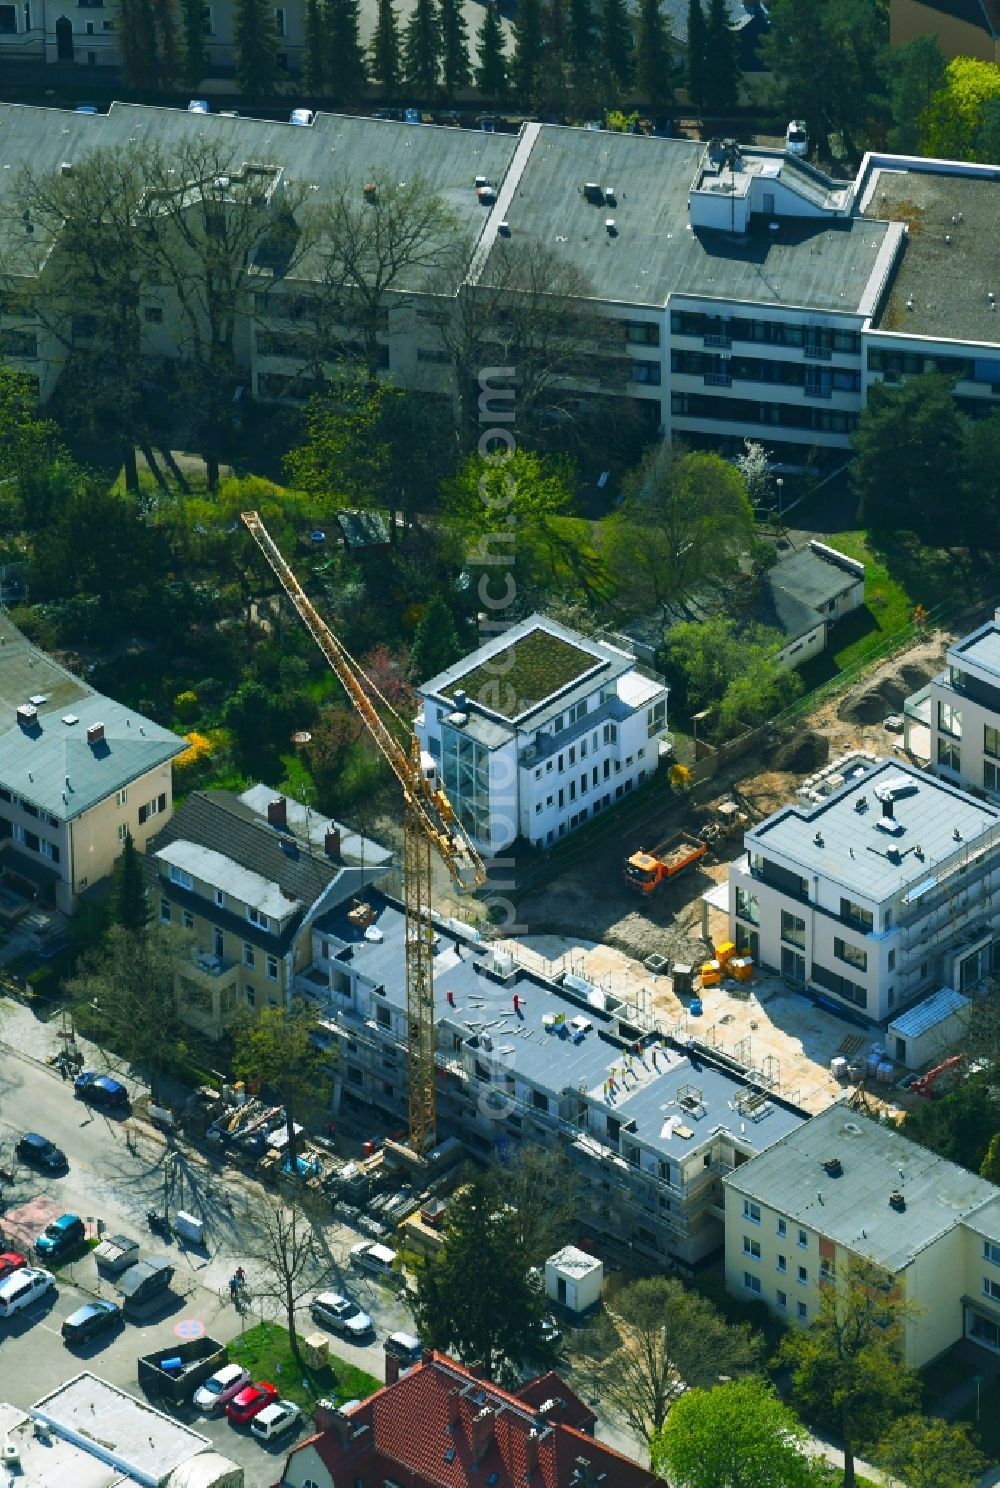 Berlin from above - Construction site to build a new multi-family residential complex Charlott NA?6 of cds Wohnbau Berlin GmbH on Charlottenburger Strasse in the district Steglitz-Zehlendorf in Berlin, Germany